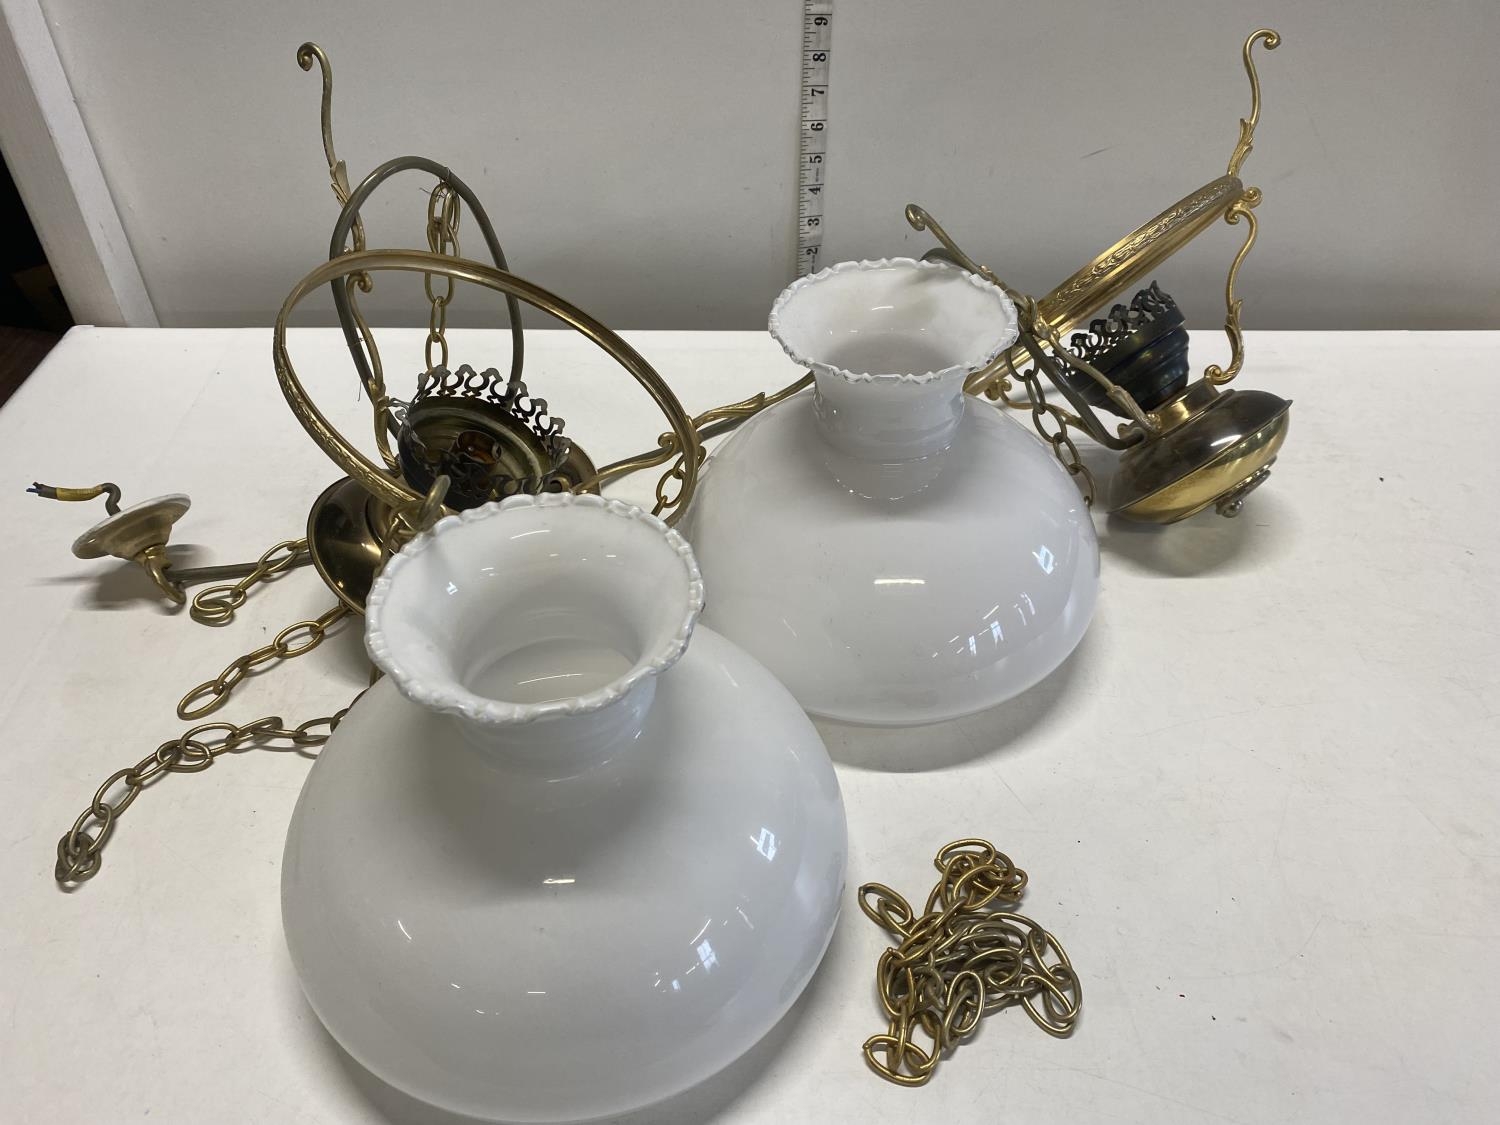 Two vintage brass and glass ceiling shade and fittings, shipping unavailable